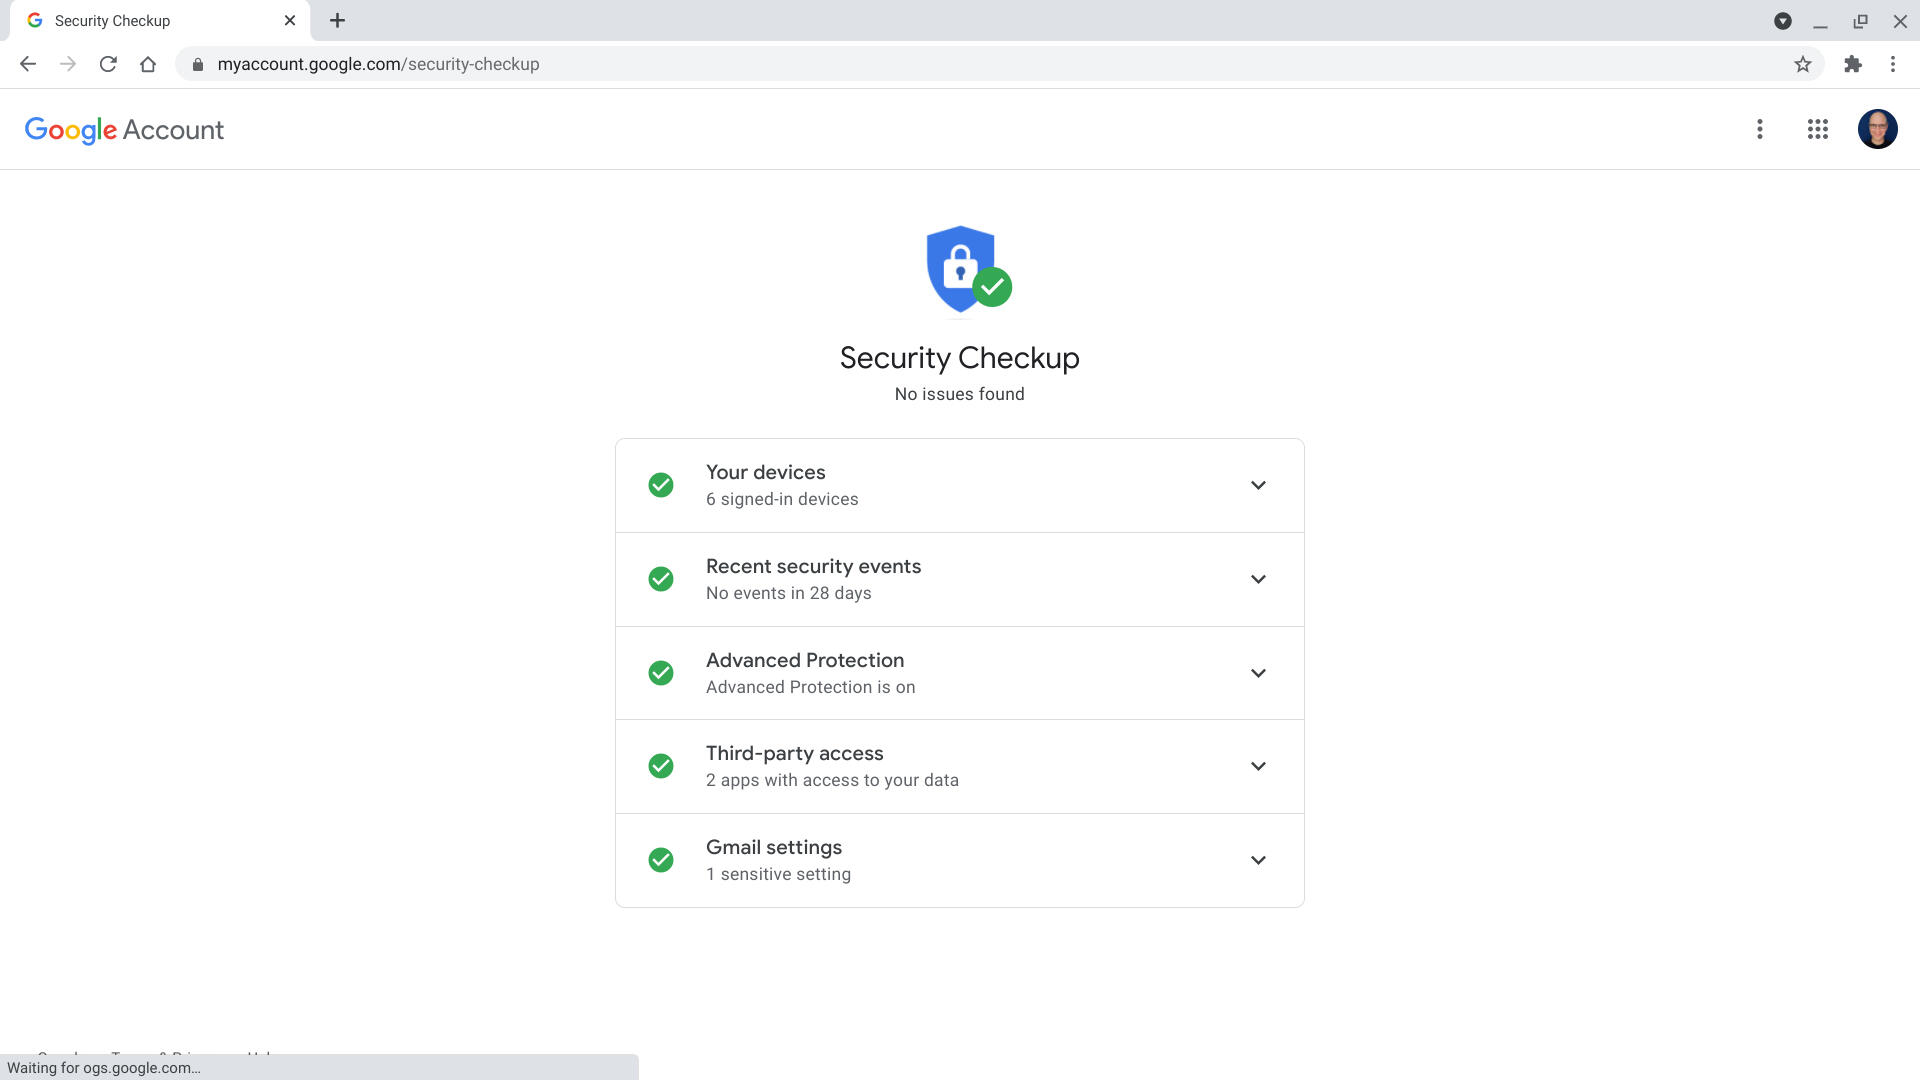 Screenshot of Security Checkup screen, with all items indicated as checked and green to indicated completion.